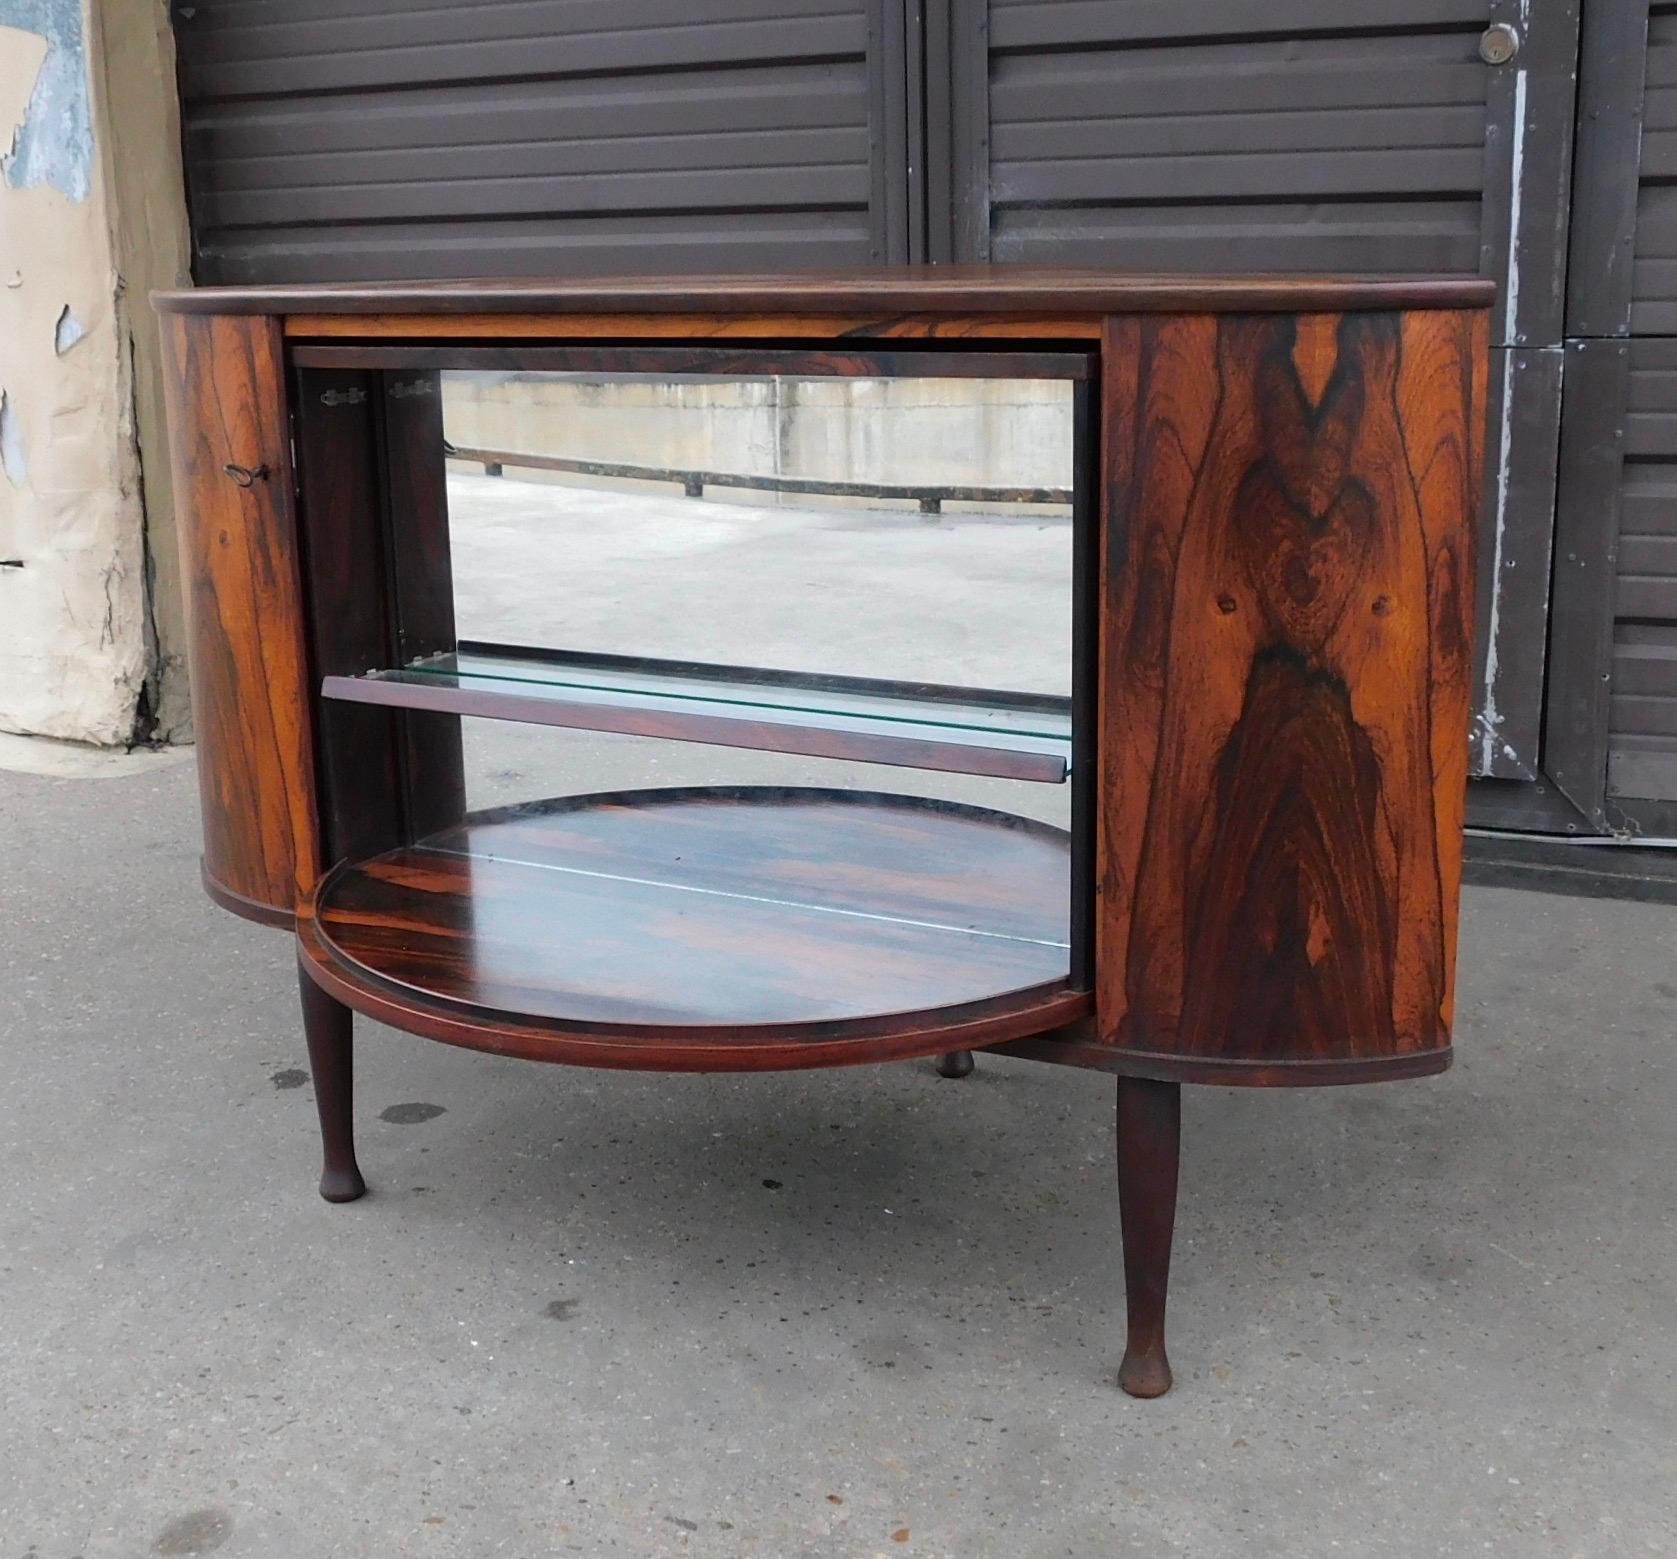 Danish Mid-Century Modern Rosewood Corner Dry Bar and Bookcase, circa 1960 For Sale 2